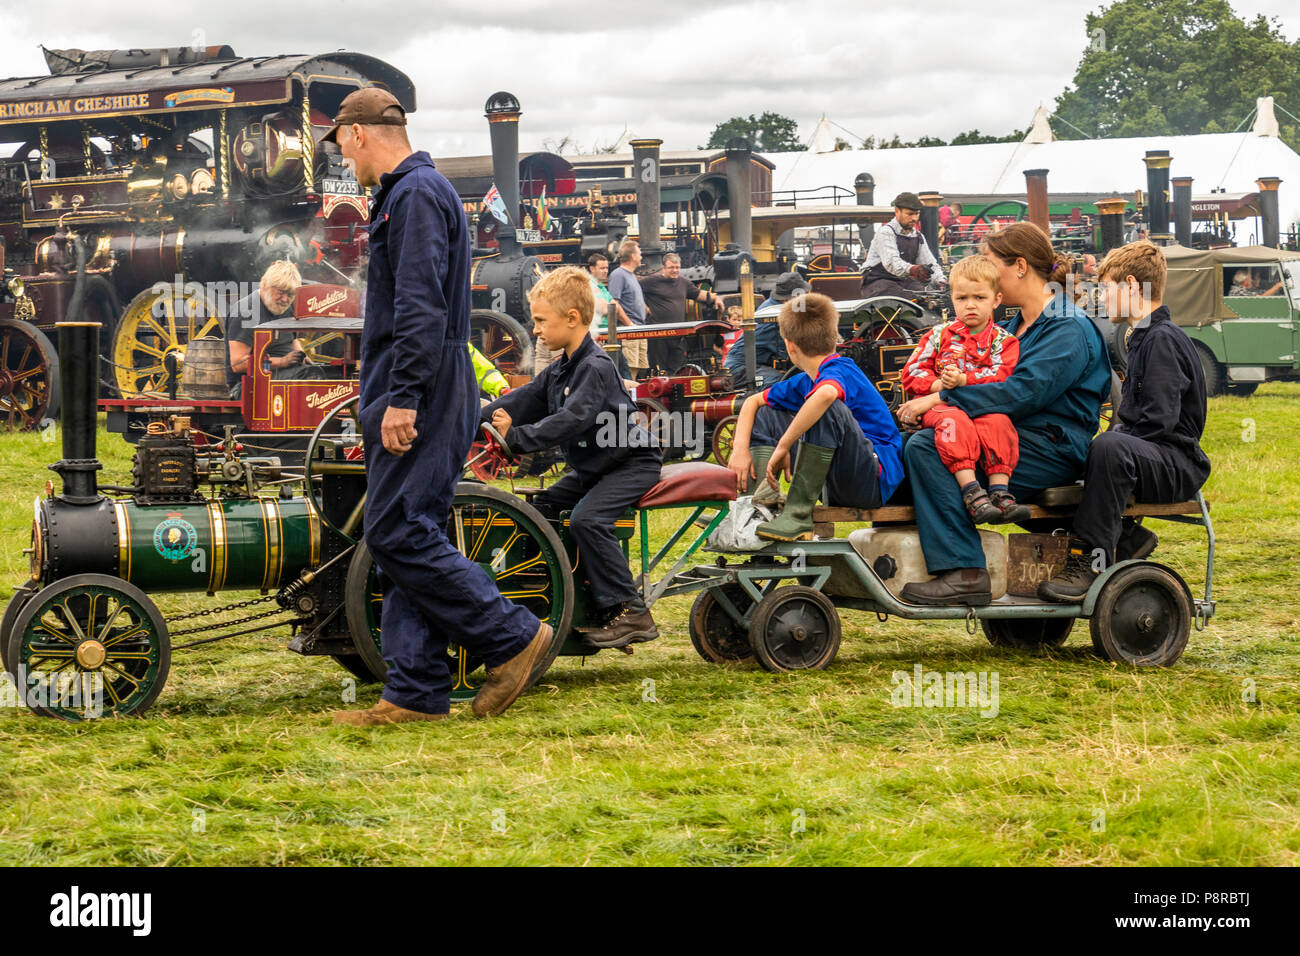 Miniature traction engines on display at Astle Park steam festival Chelford,Cheshire, United Kingdom Stock Photo